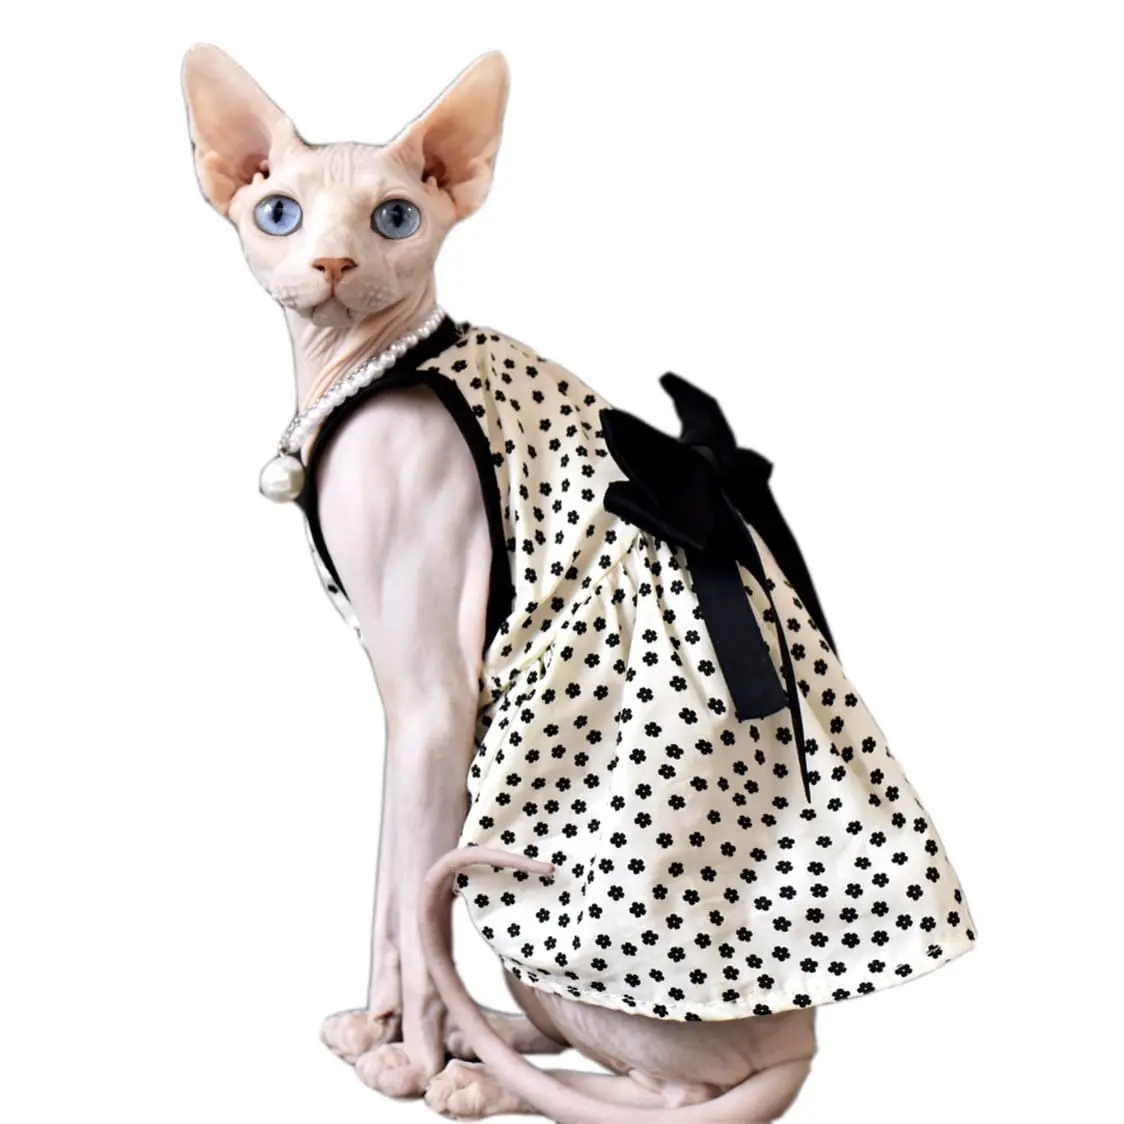 Sphynx Cat Clothes Girl-Black Bow Dress for Sphynx Hairless Cat